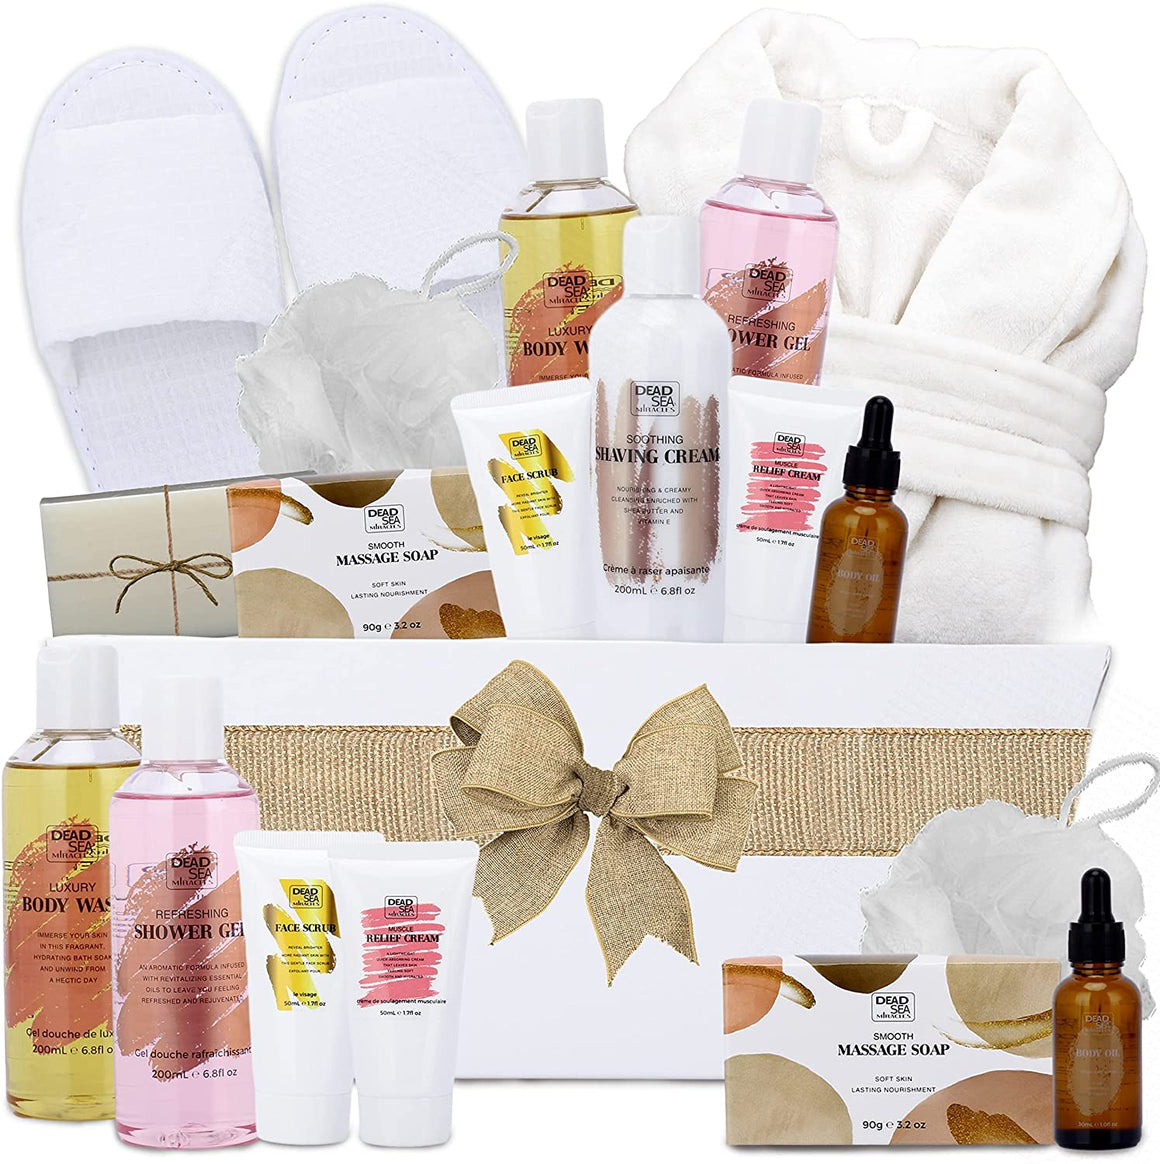 Ultimate Bath & Body Lavender 10-Piece Gift Set Spa Basket with Bathrobe by Dead Sea Miracles